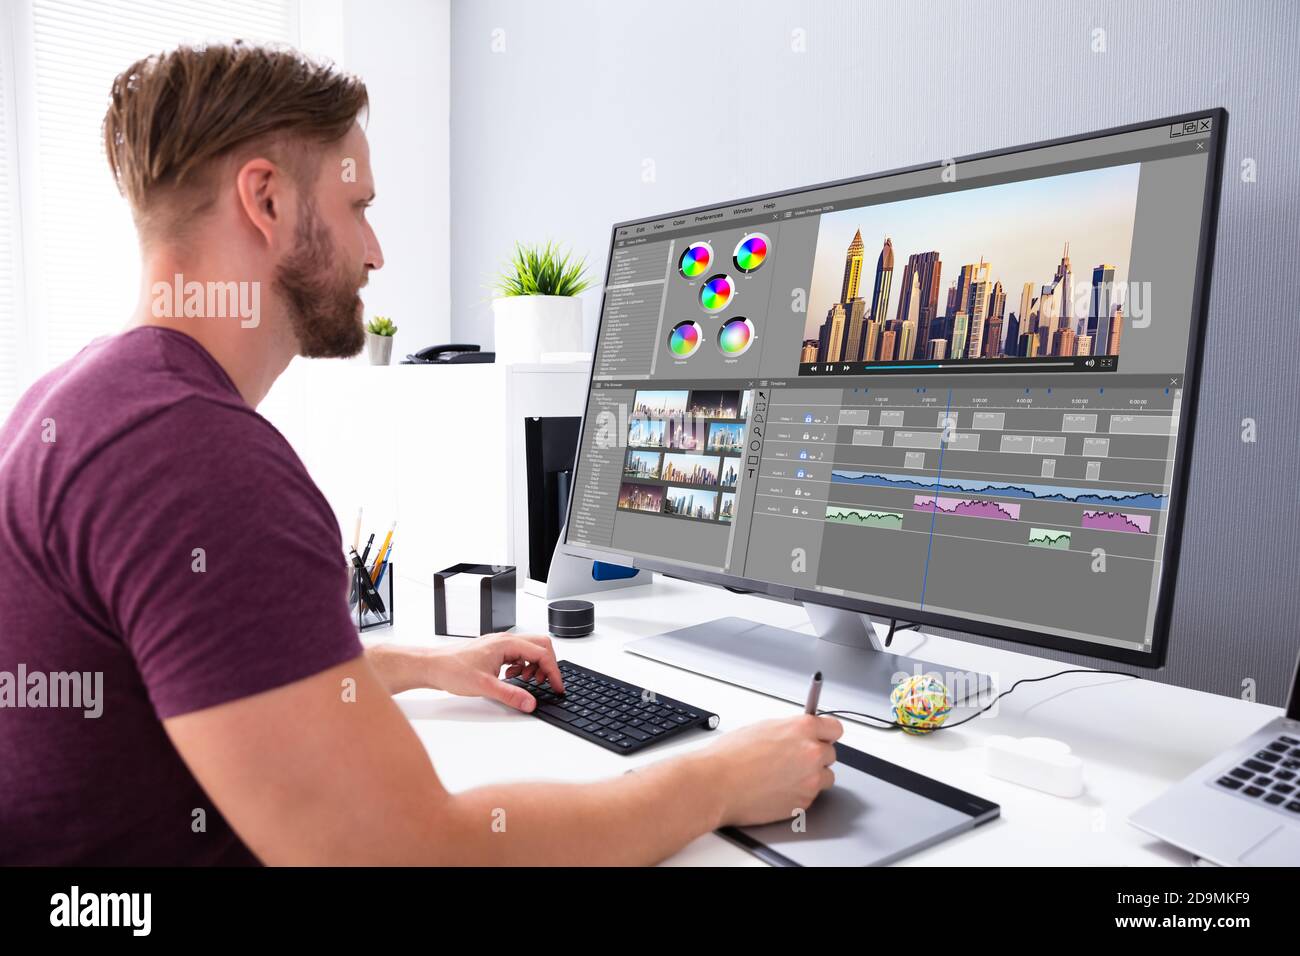 Video Editor Or Designer Using Editing Software Tech On Computer Stock Photo